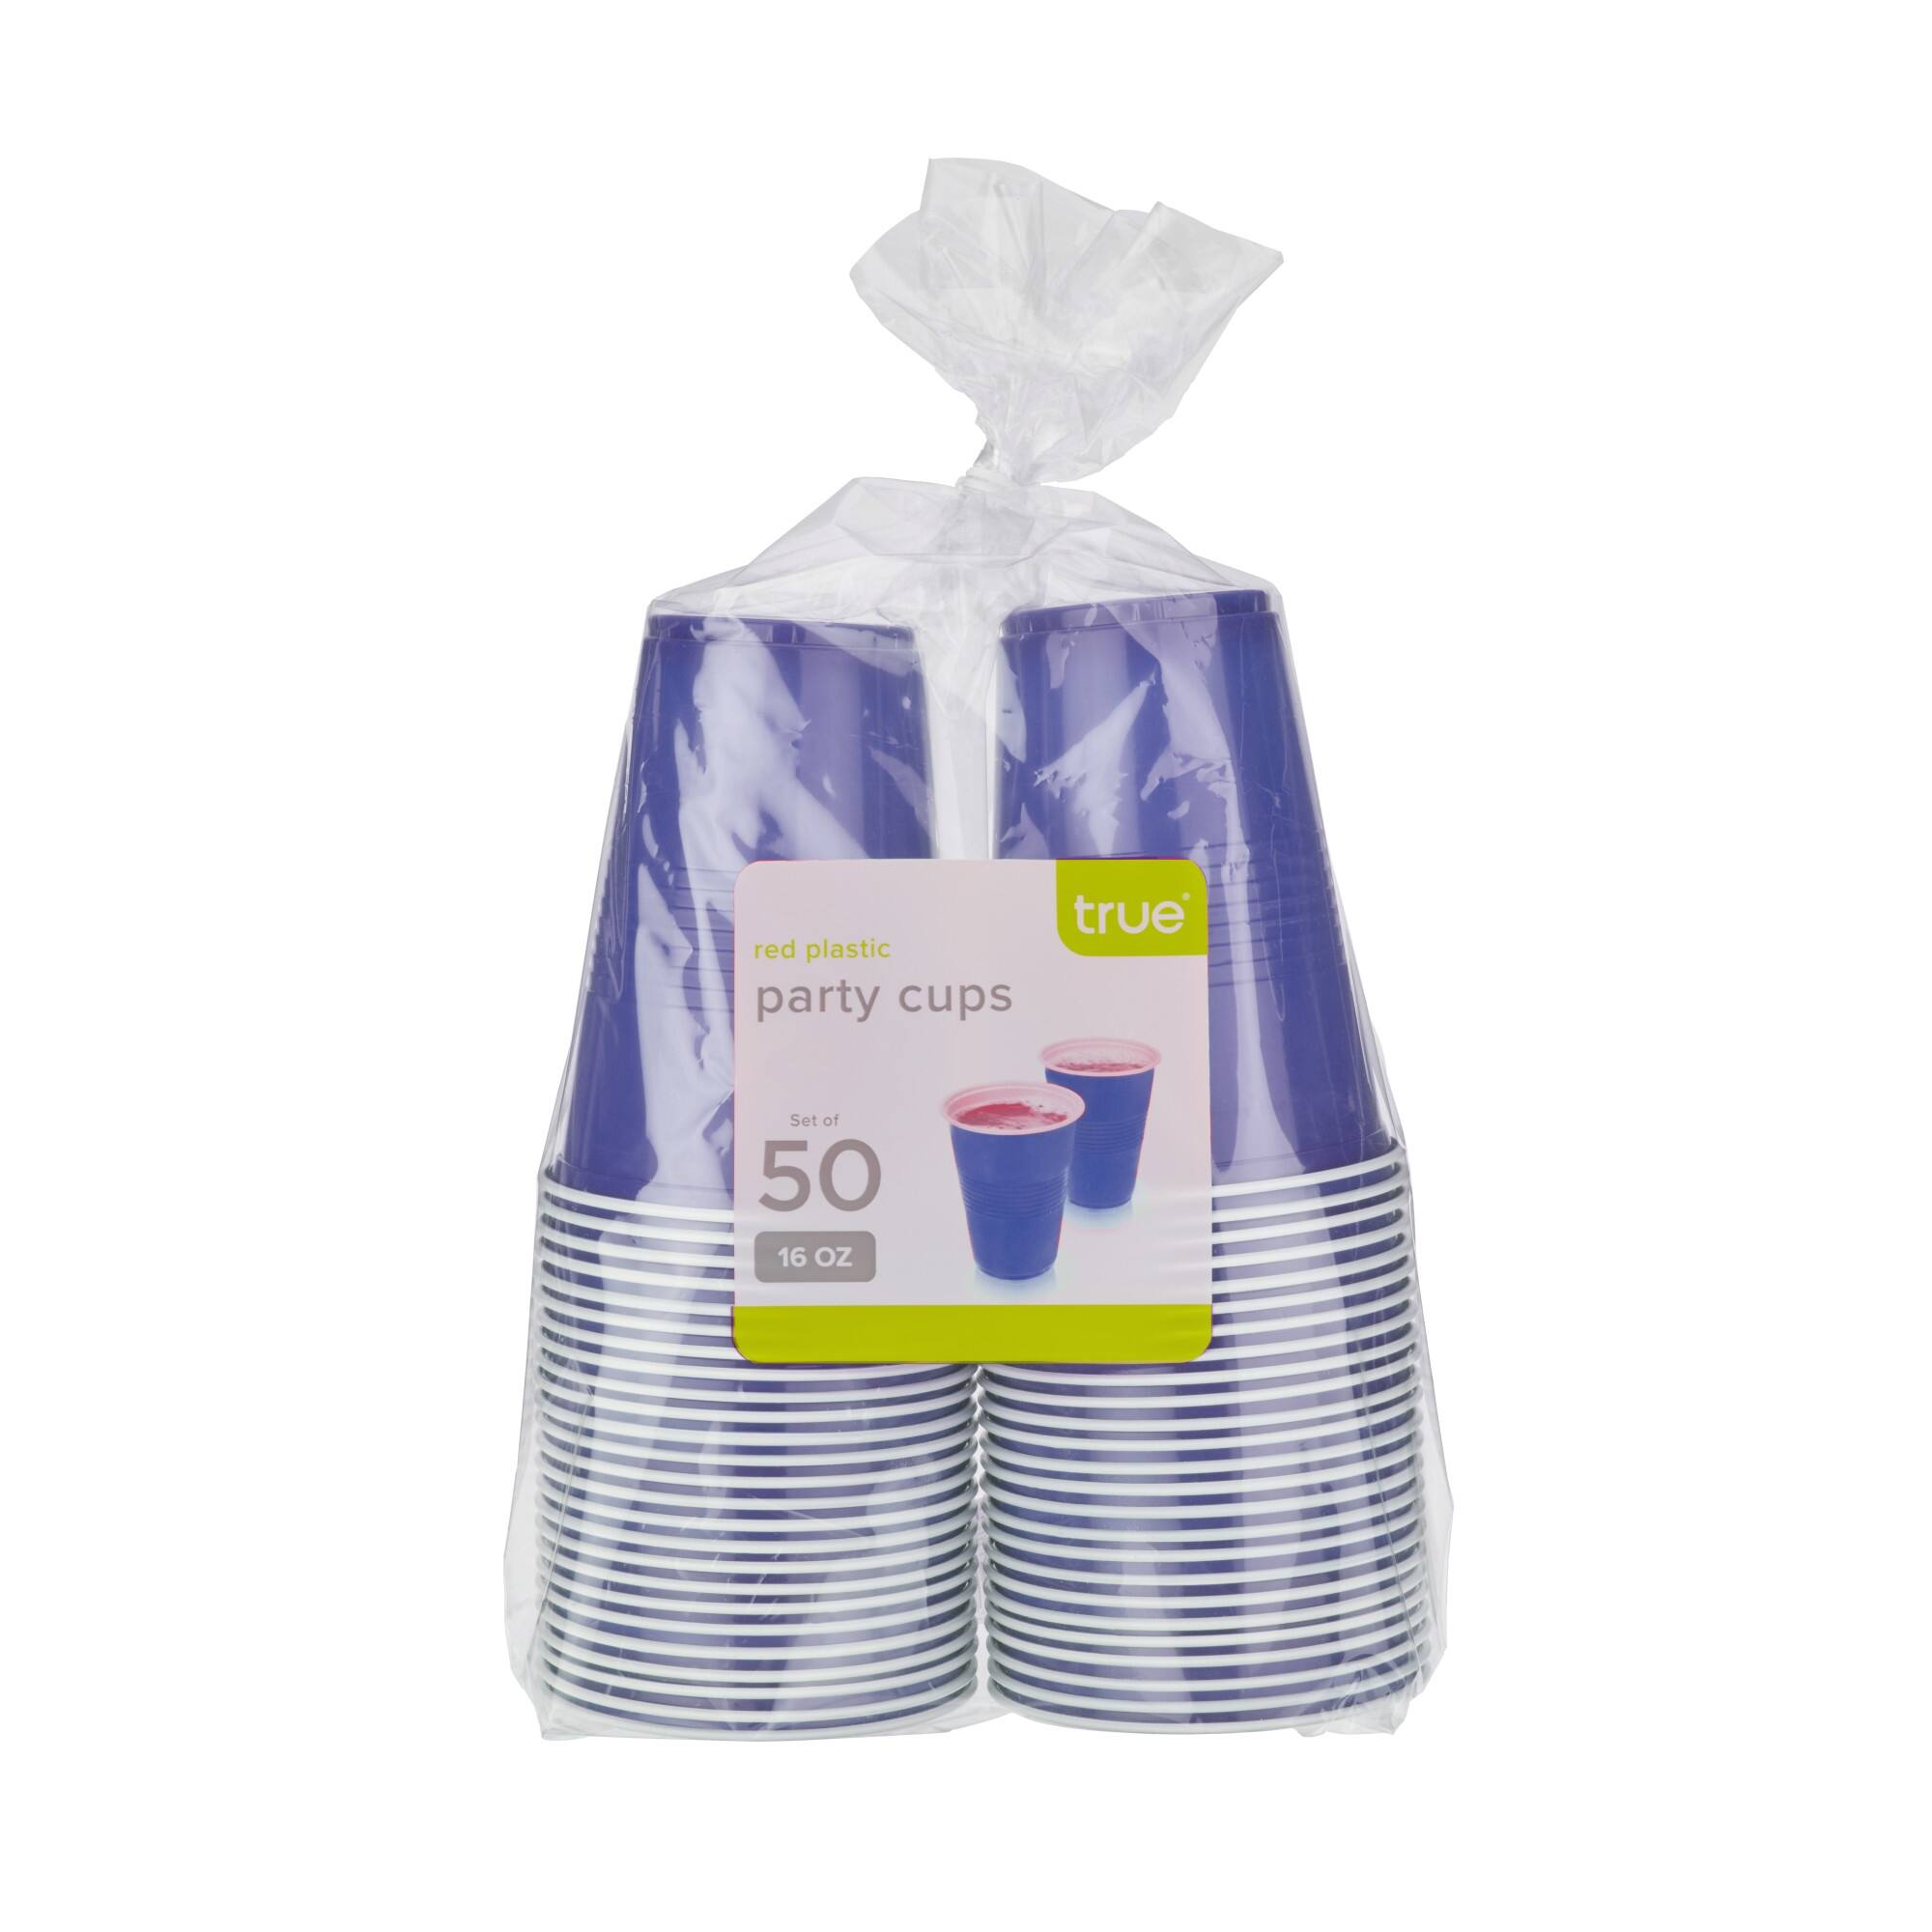 16 oz Blue Party Cups, 50 pack by True - 4.75" x 3.75"